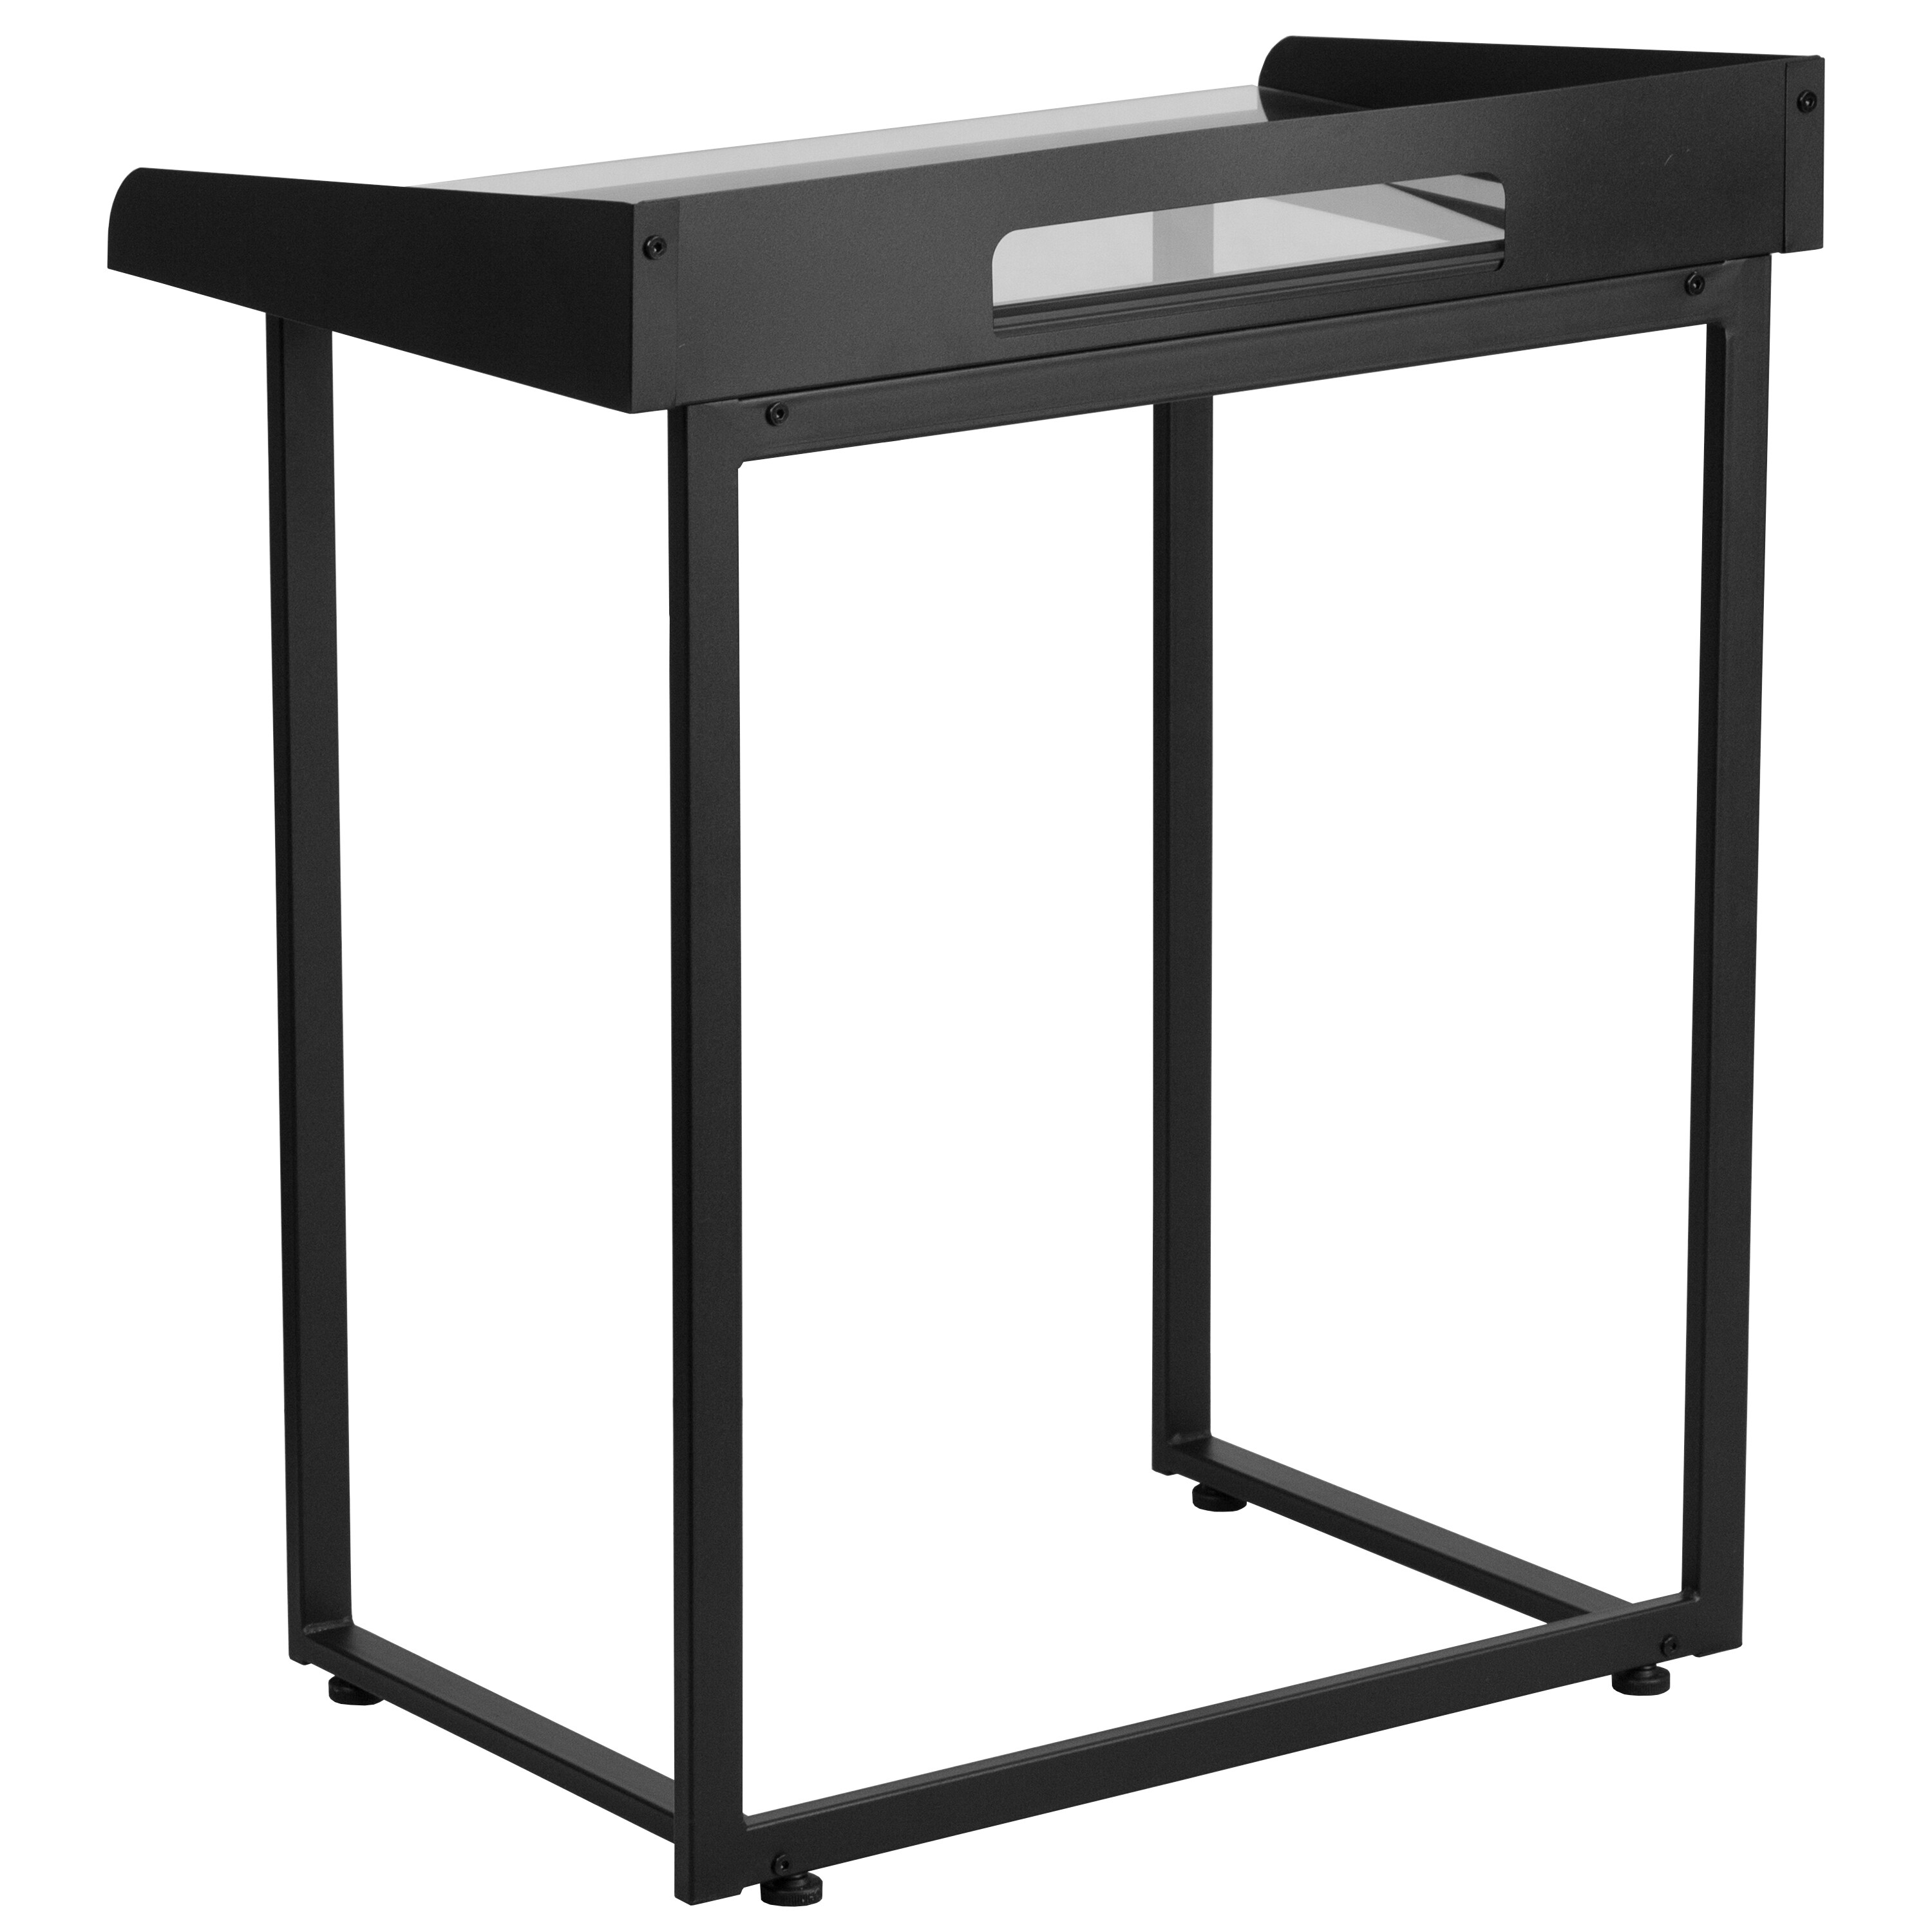 Kali Clear Tempered Glass and Black Frame Contemporary Desk